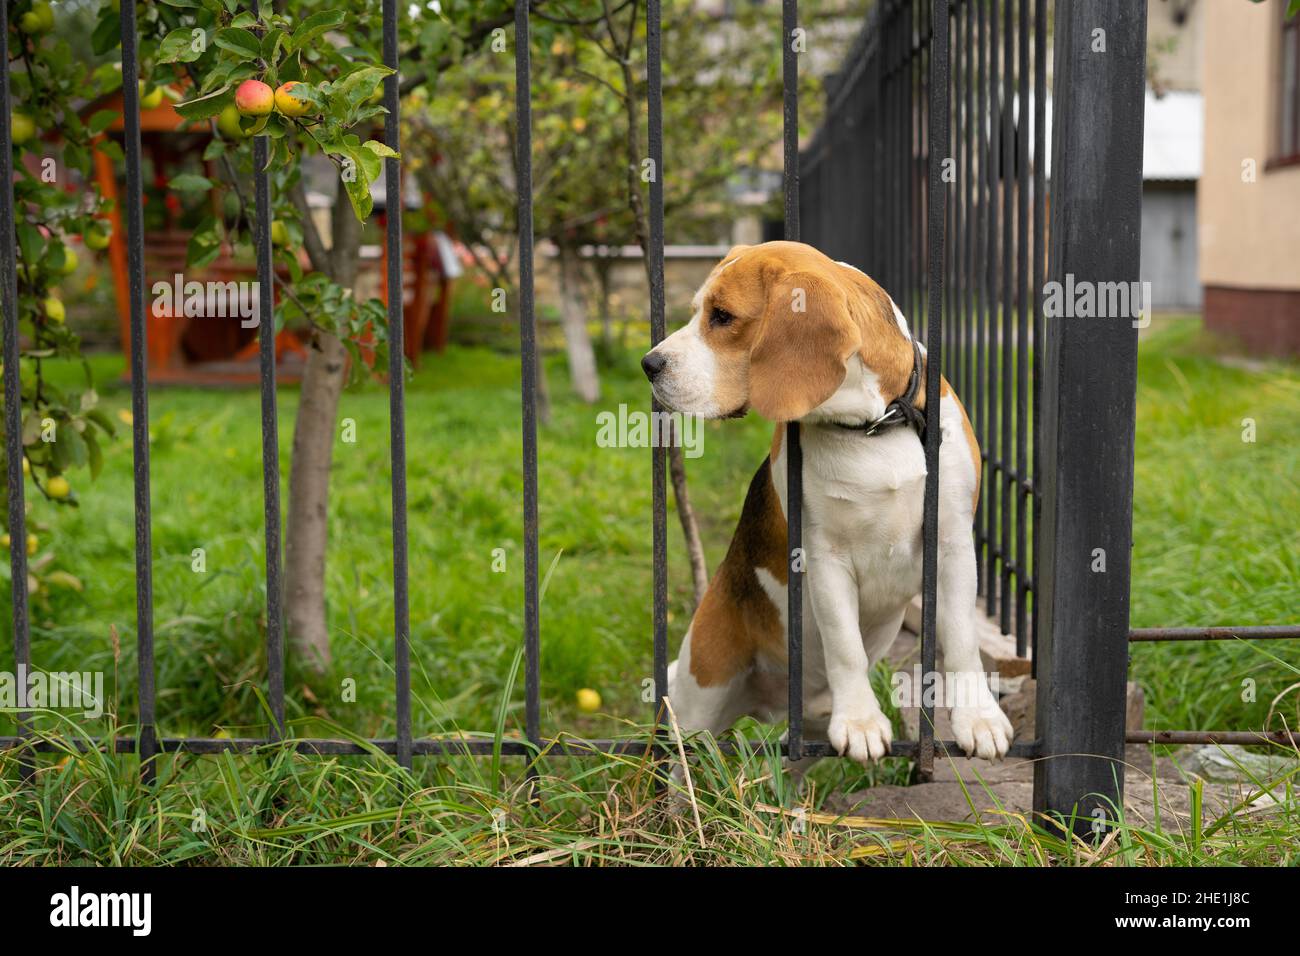 A beagle dog barks behind a forged metal fence sitting on the grass. Stock Photo